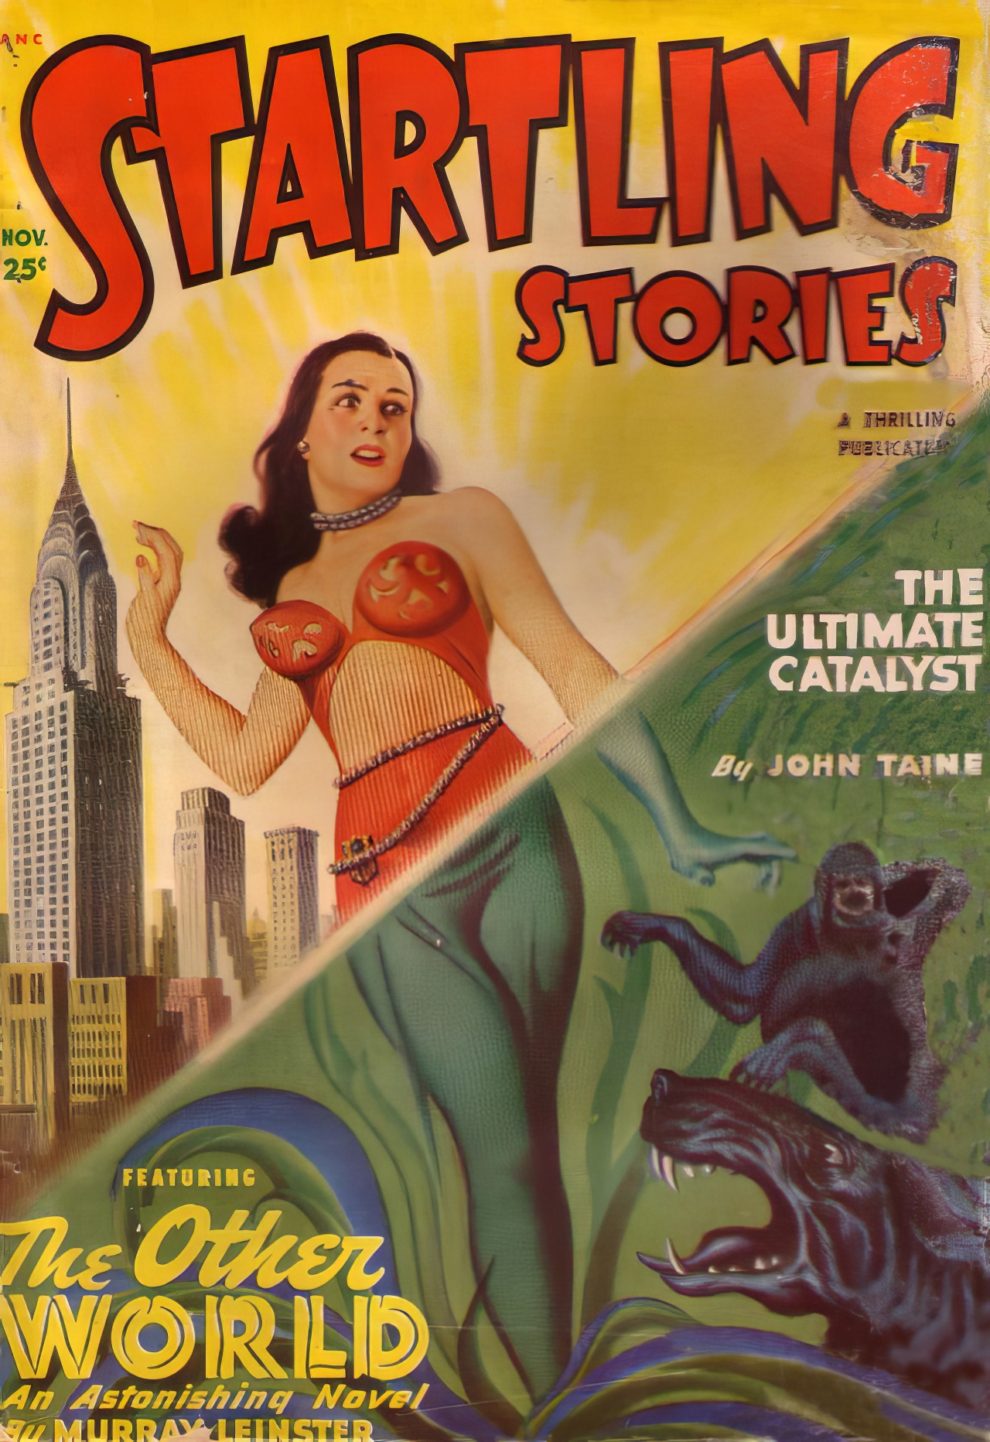 Startling Stories Covers 1940s 49 